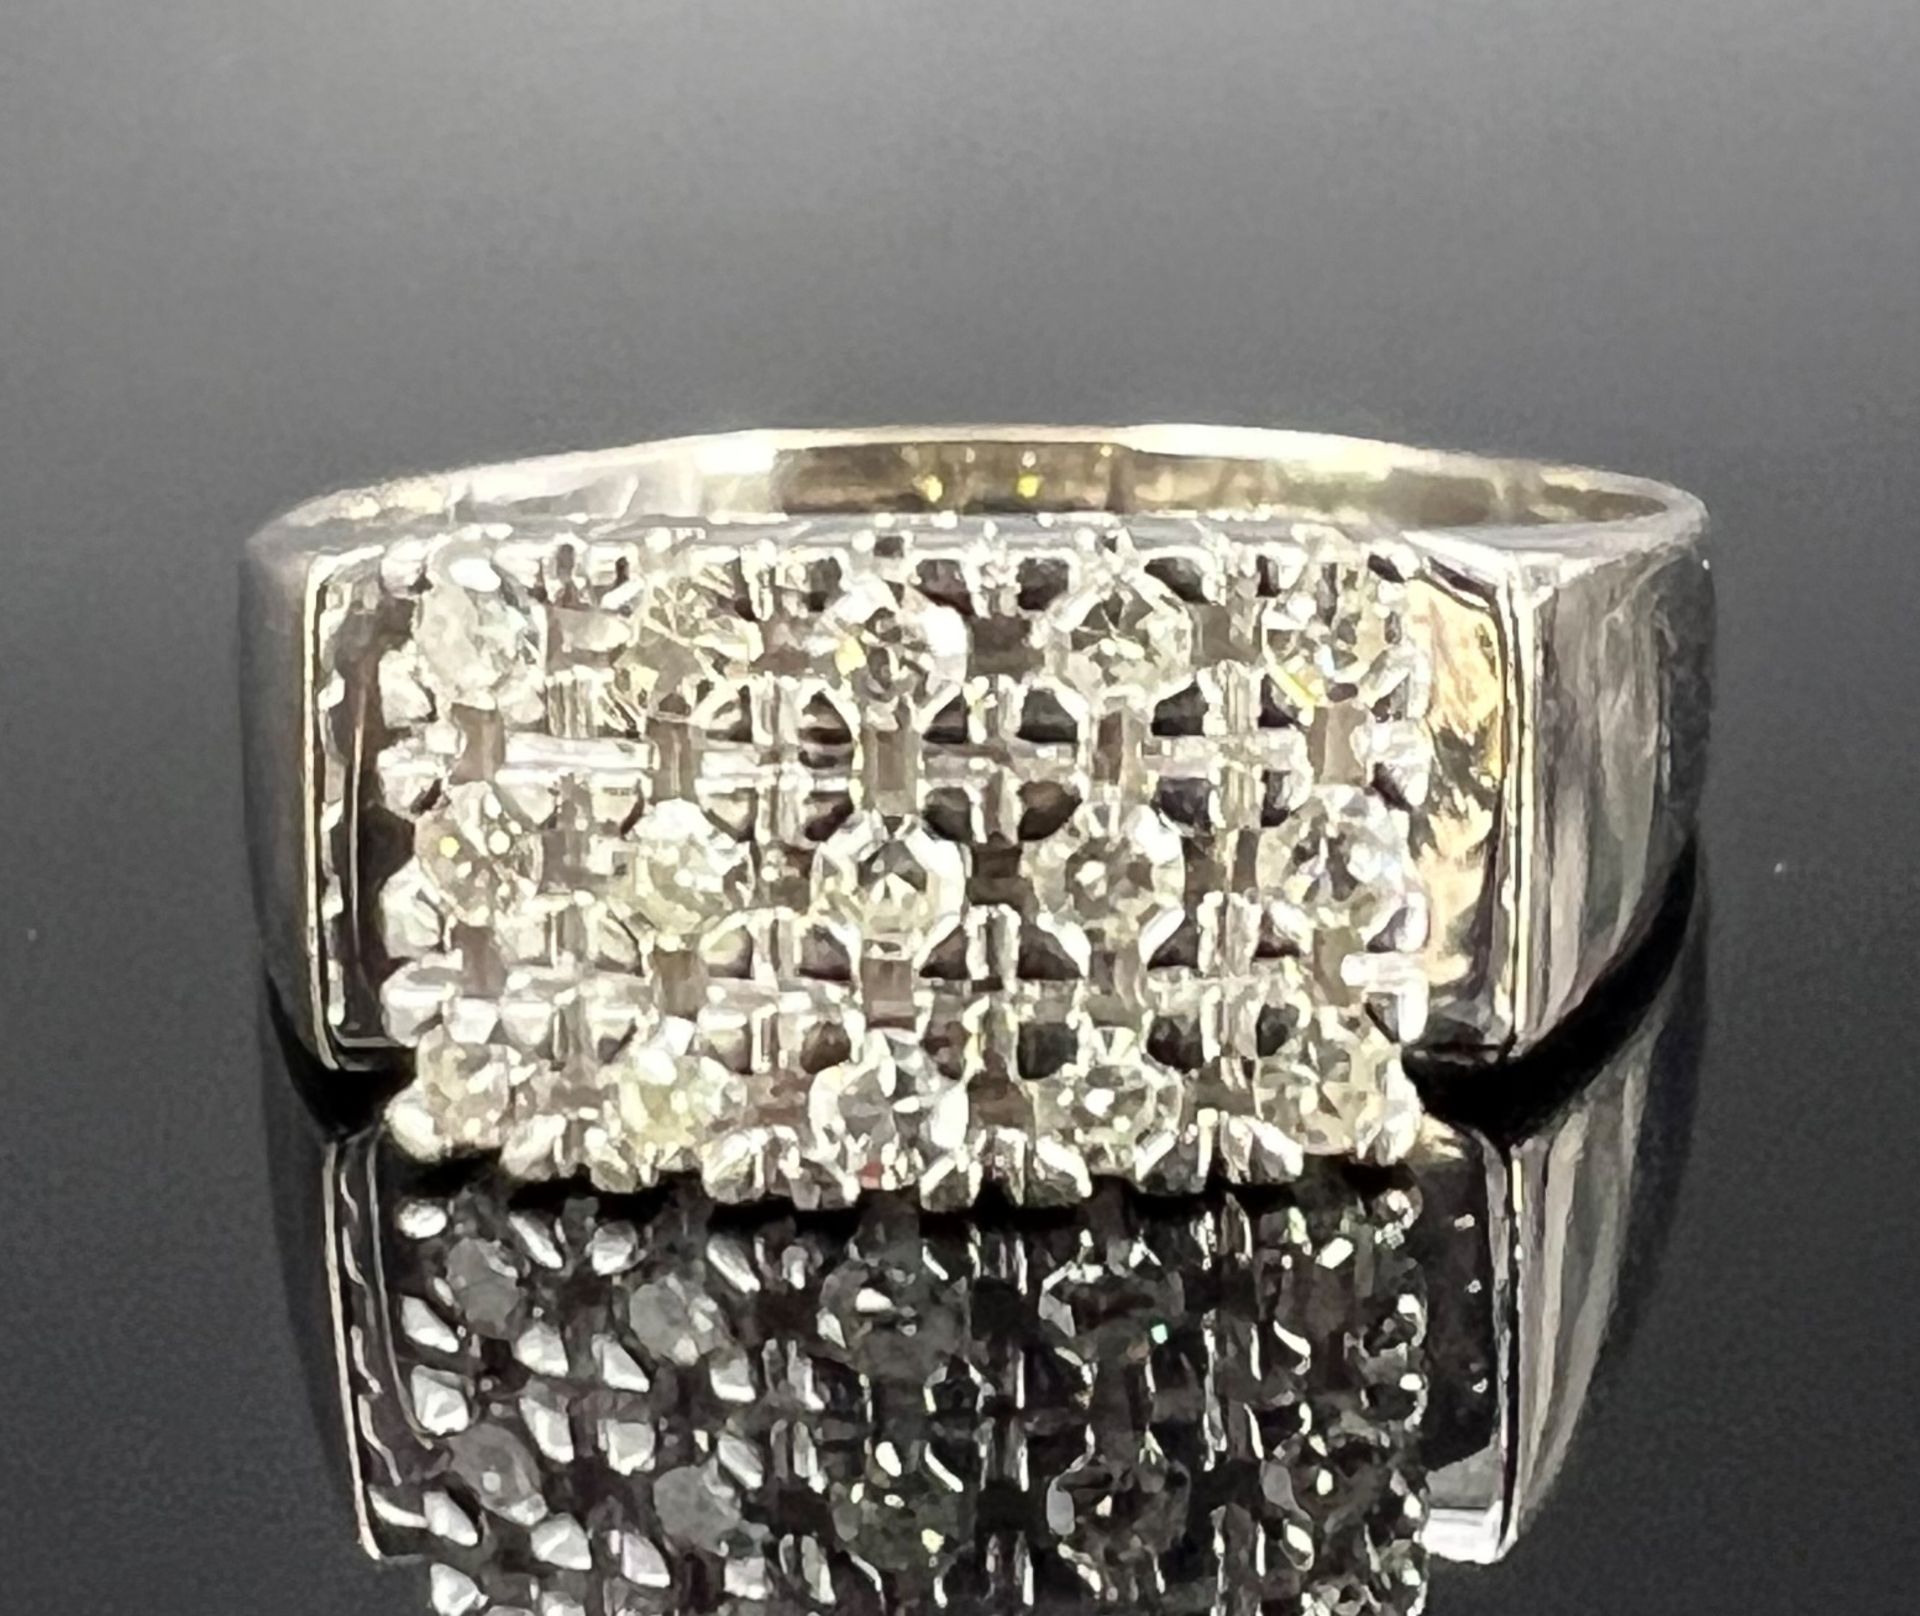 Ladies' ring. 585 white gold with diamonds. - Image 2 of 7